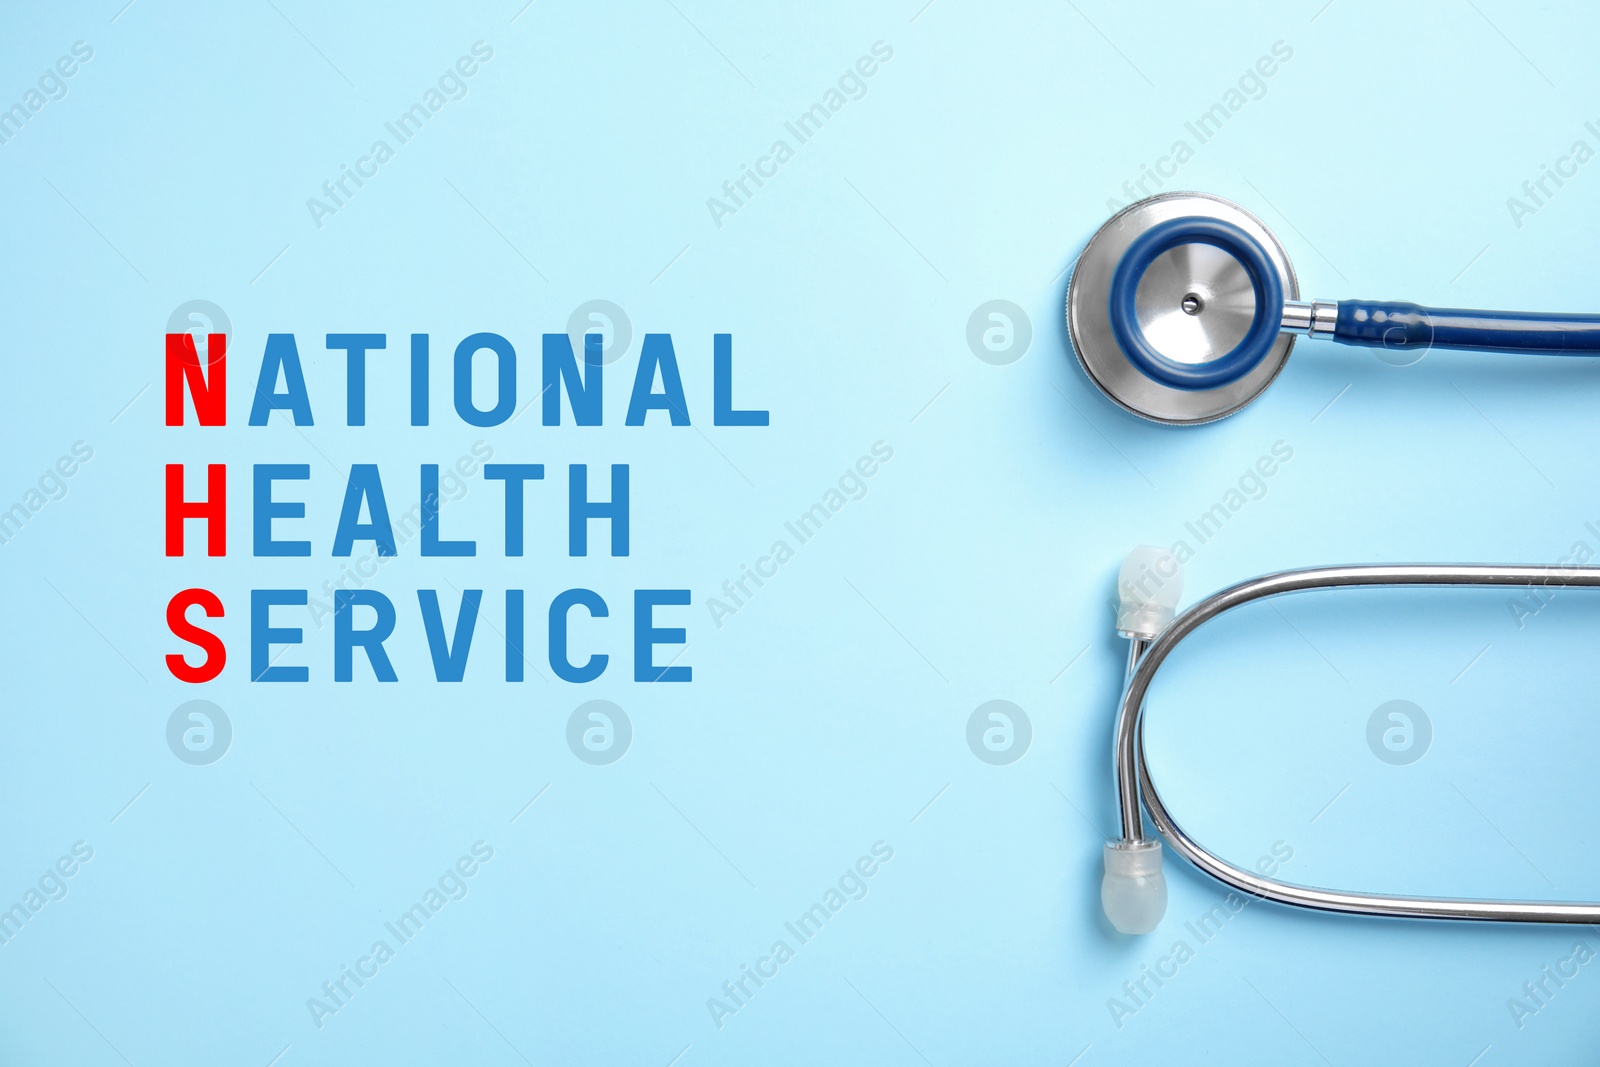 Image of National health service (NHS). Stethoscope and text on light blue background, top view